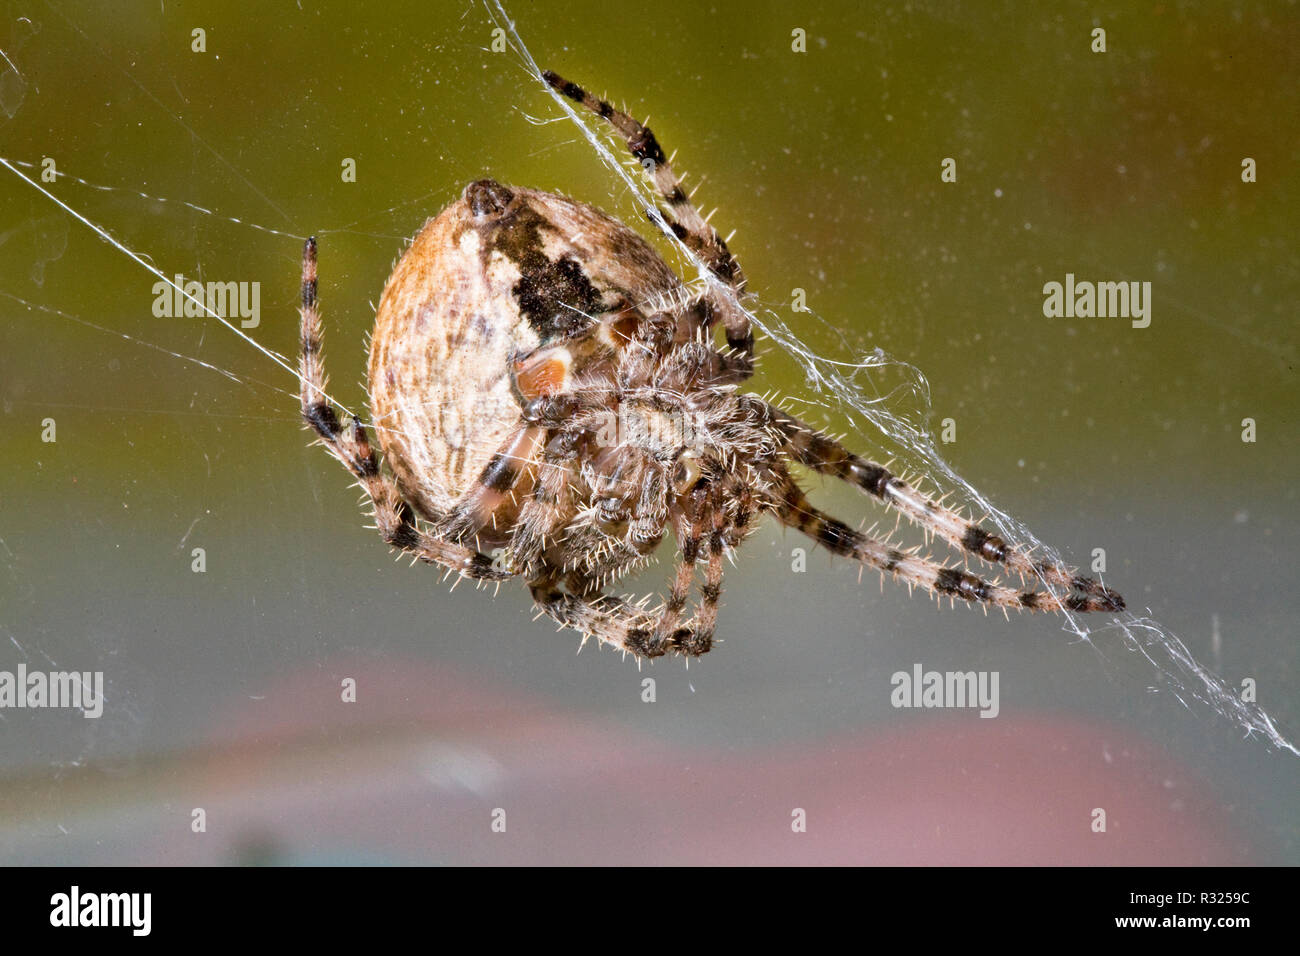 A large cross orbweaver spider, Araneus diadematus, hanging from strands of silk in its web. Stock Photo